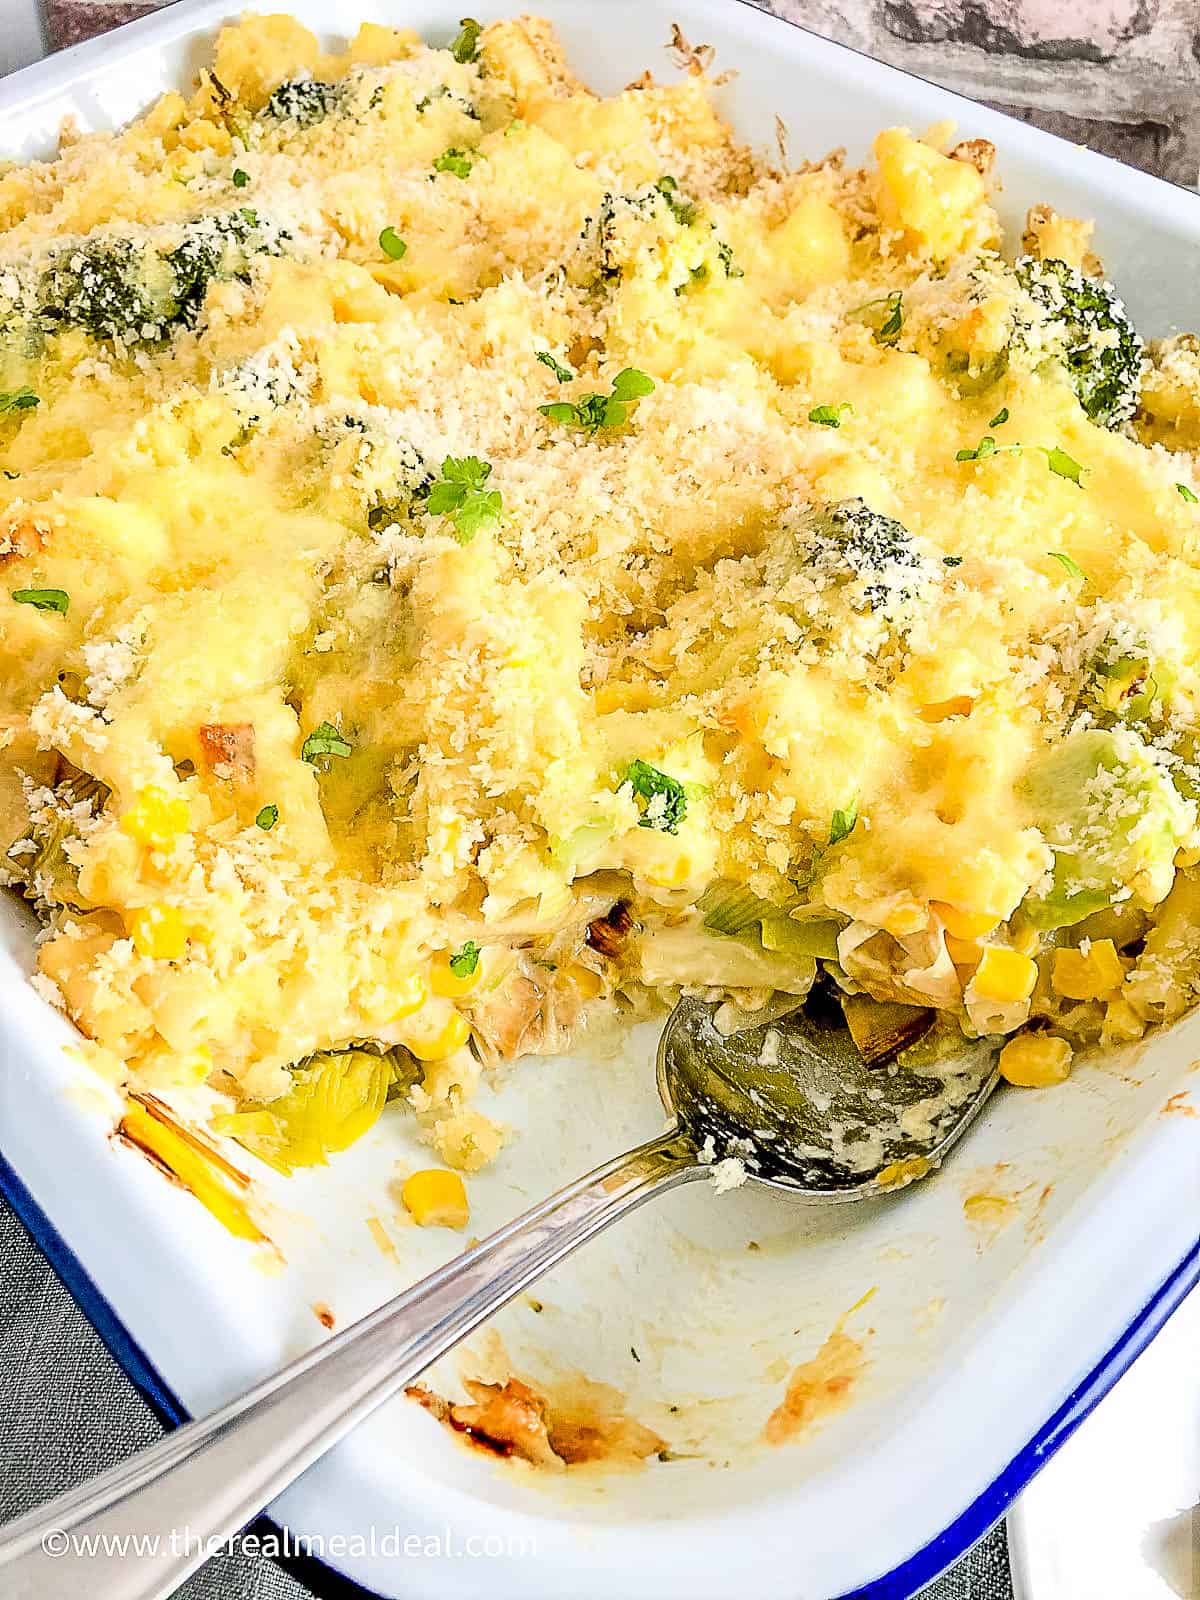 baked macaroni cheese in dish portion removed